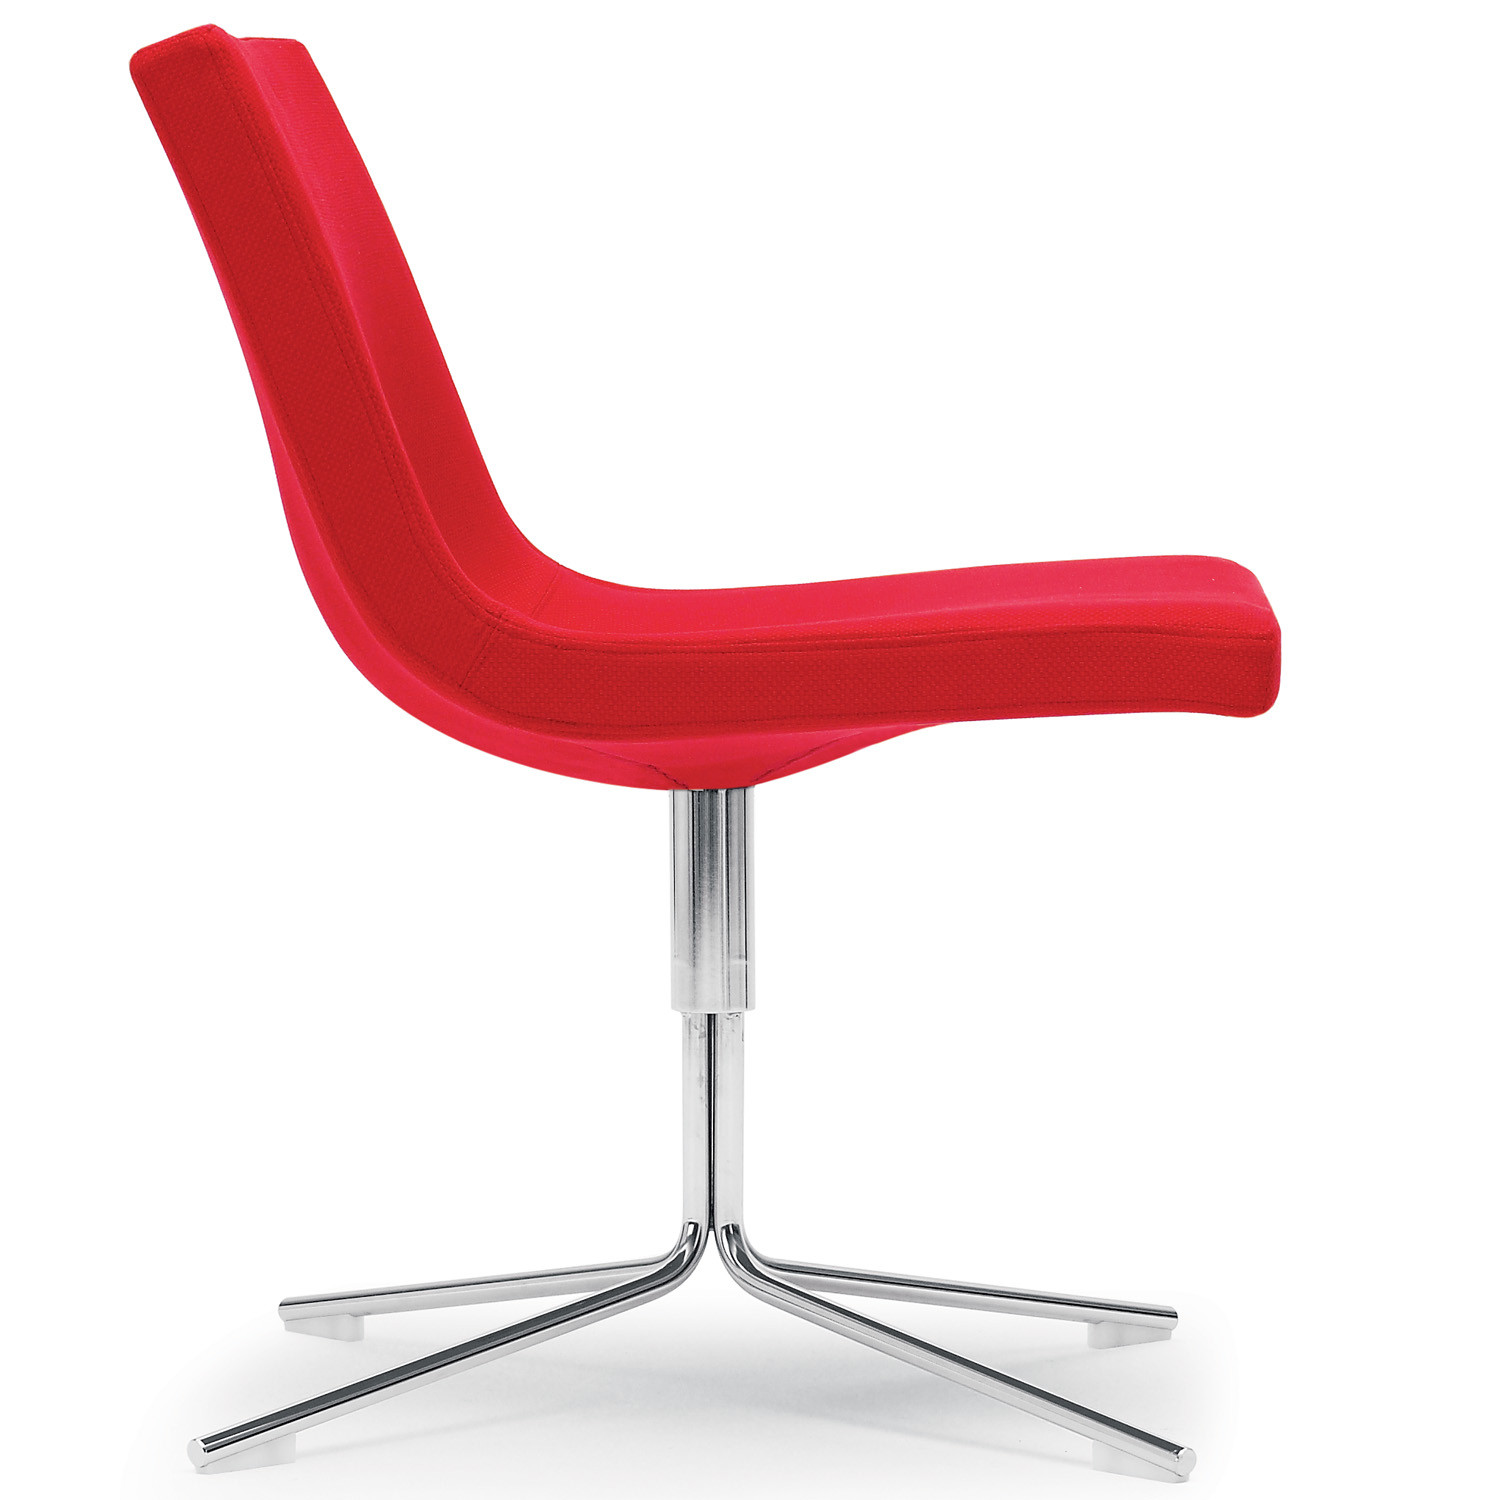 Bond Chair by Offecct